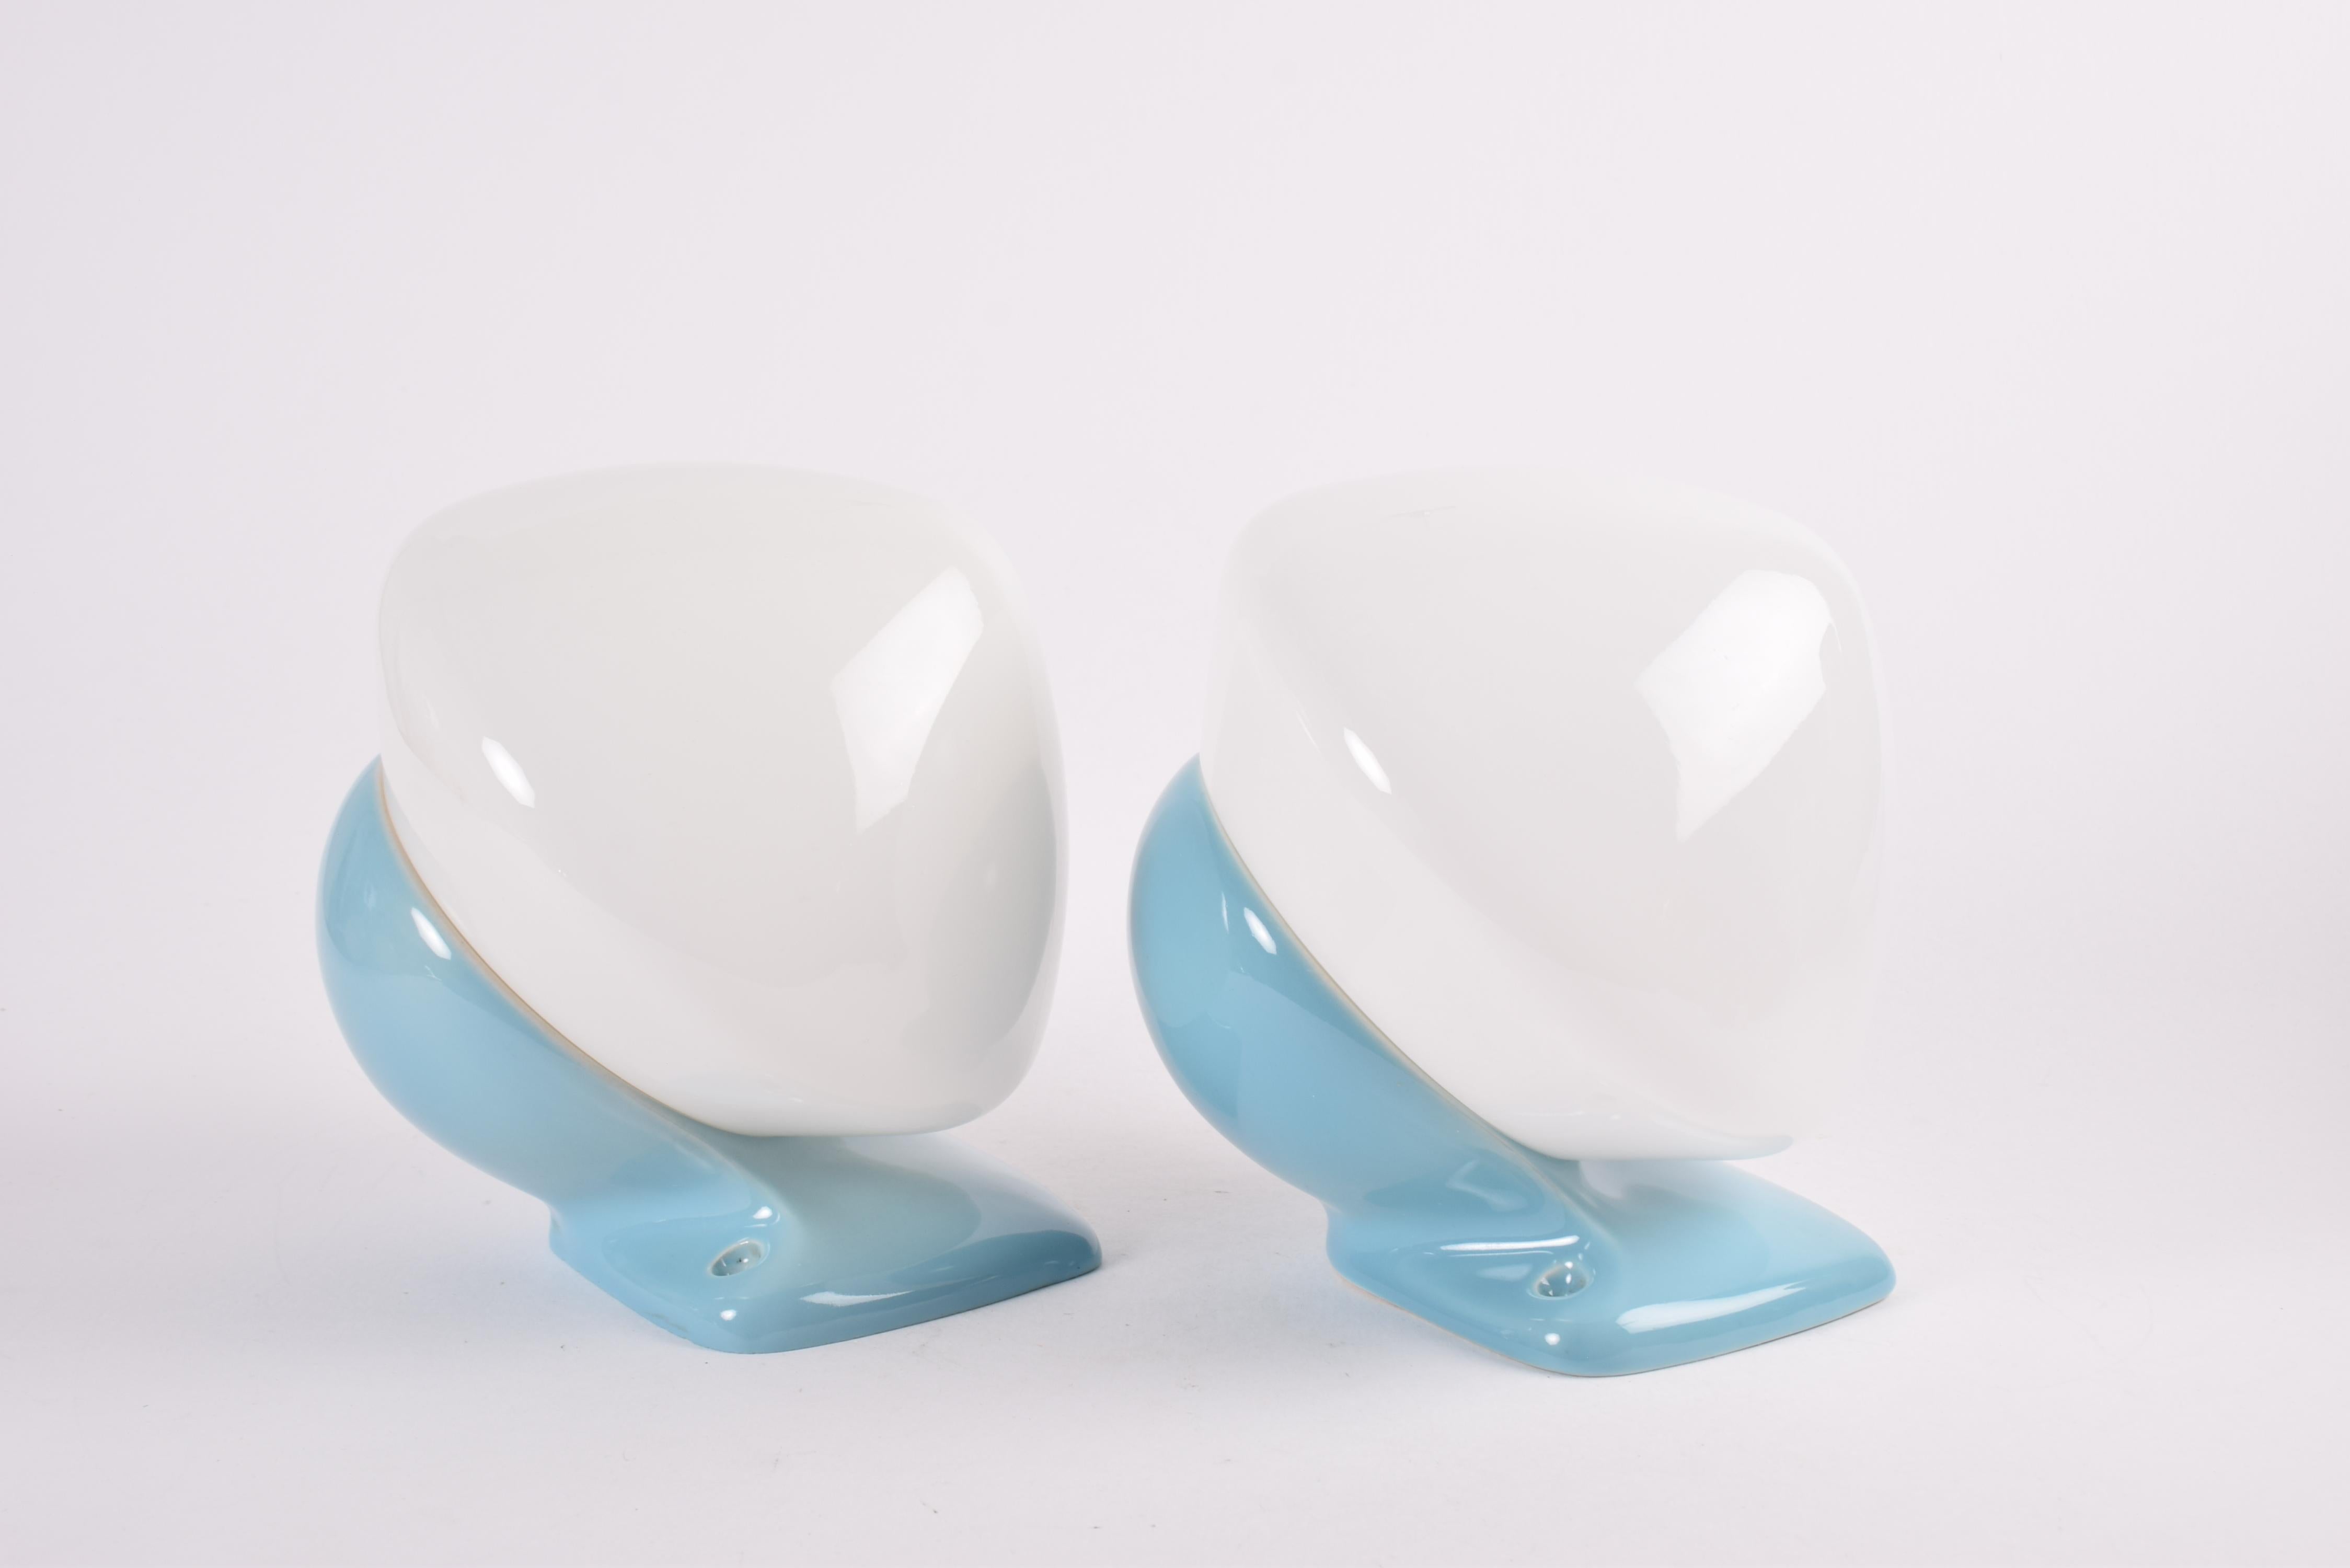 Pair of two original vintage wall sconces from Ifö, Sweden, made circa 1950s to 1960s. They come in a rare blue color version and the glass screens are made from white opaline glass. Perfect to be mounted on each side of a mirror in the